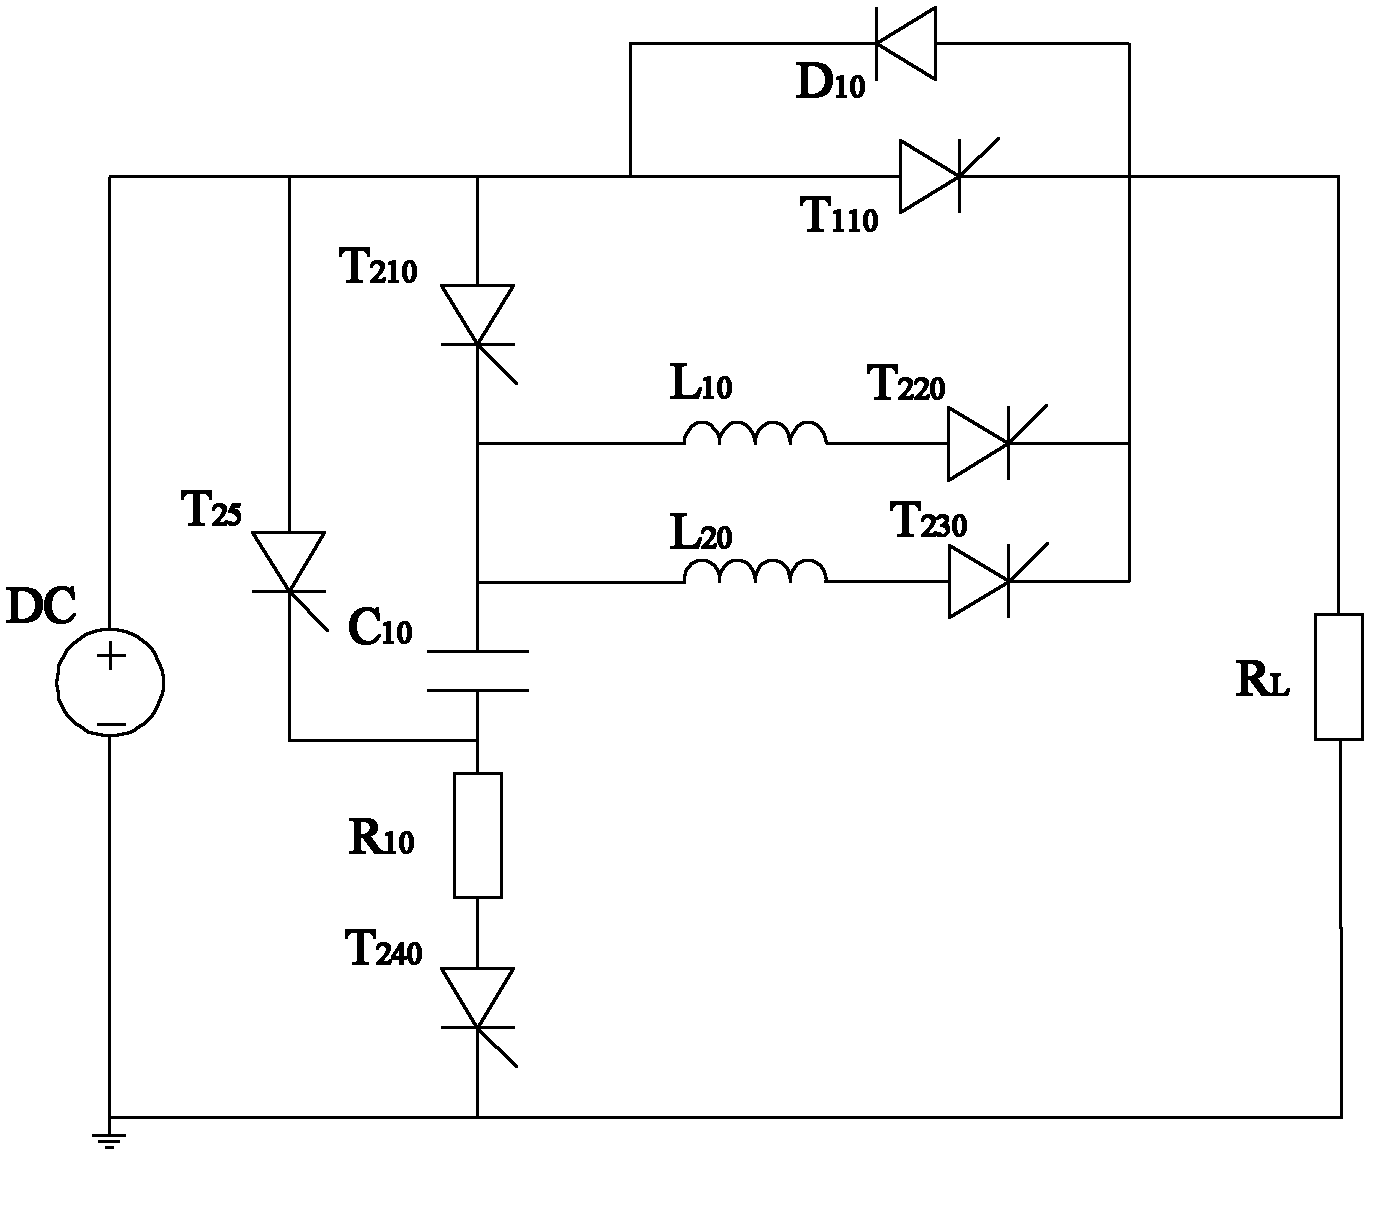 Direct-current solid-state circuit breaker